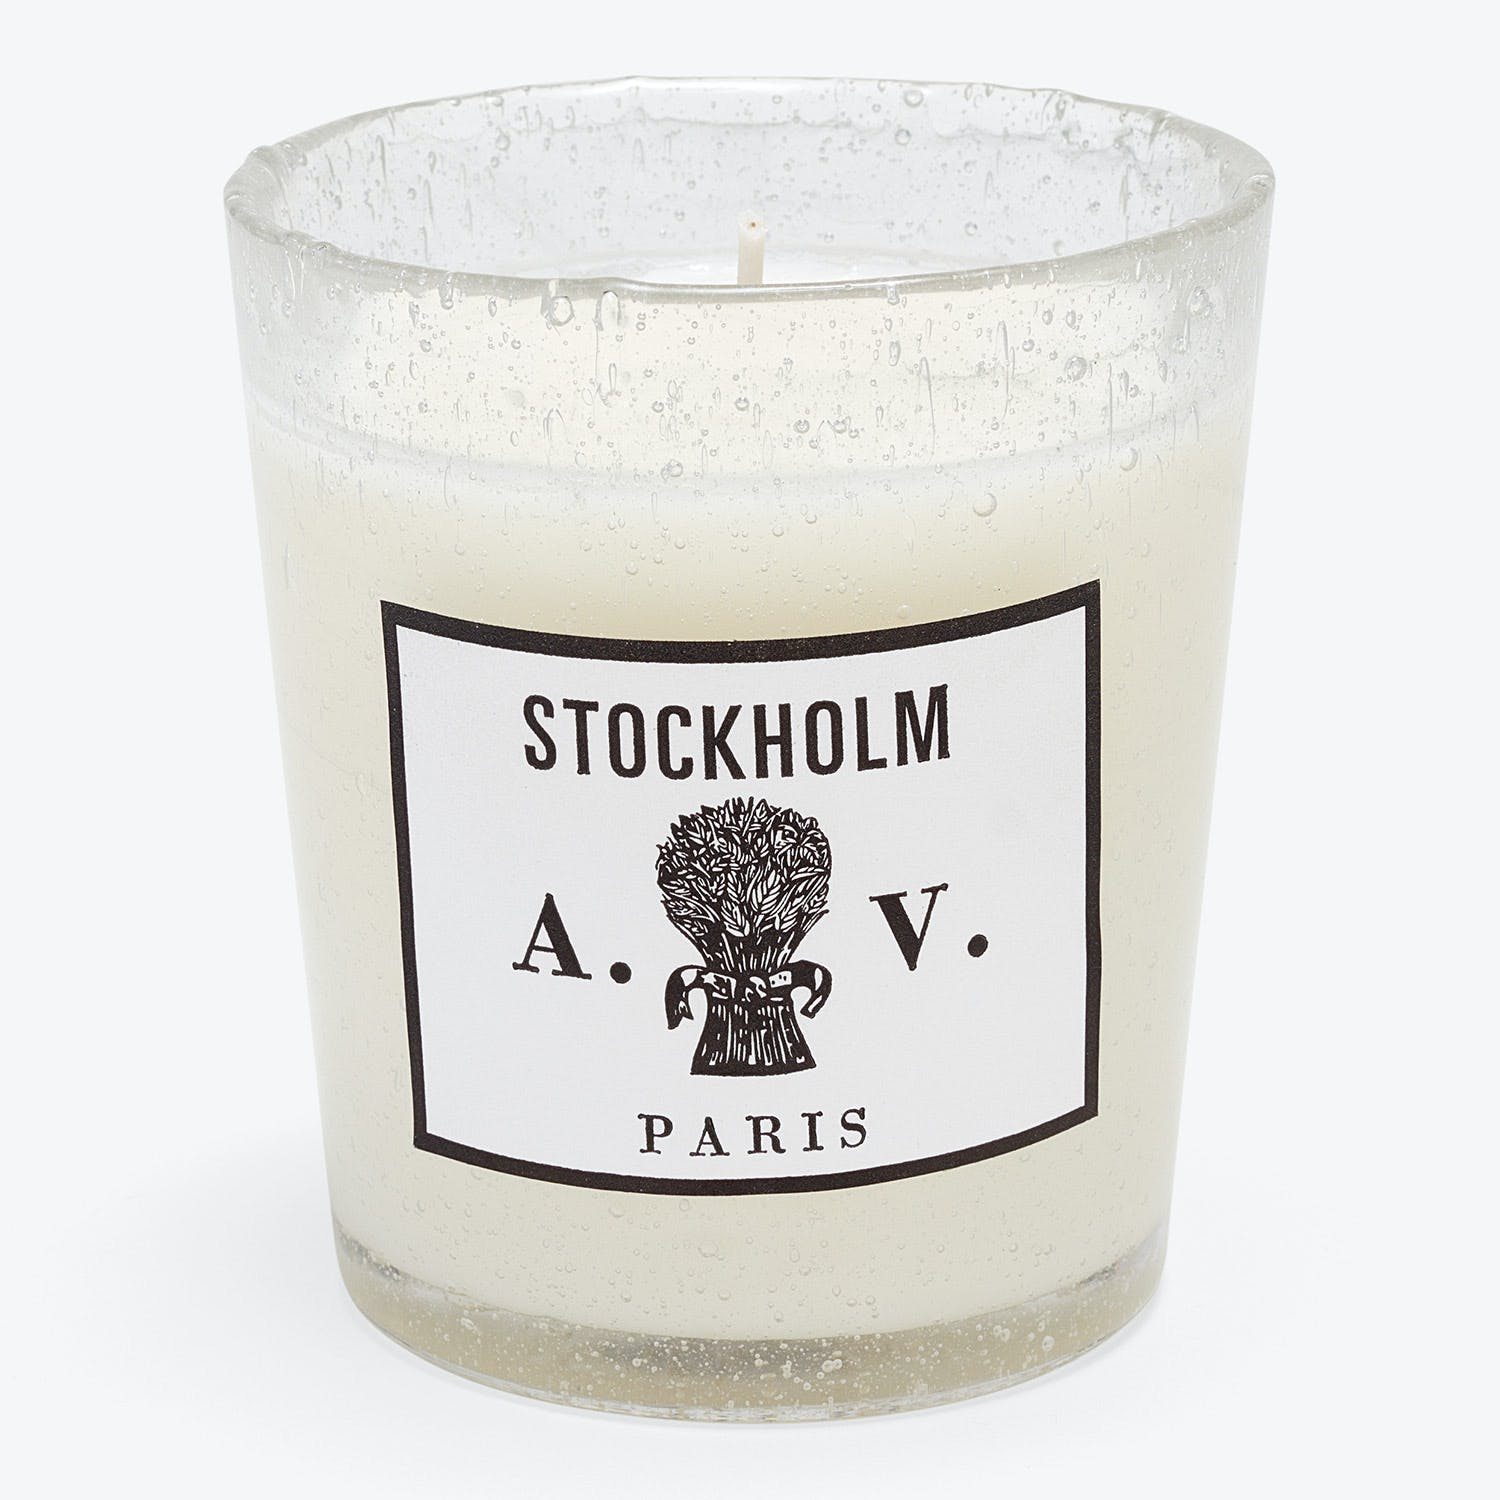 Stockholm scented candle with minimalist design and European luxury feel.